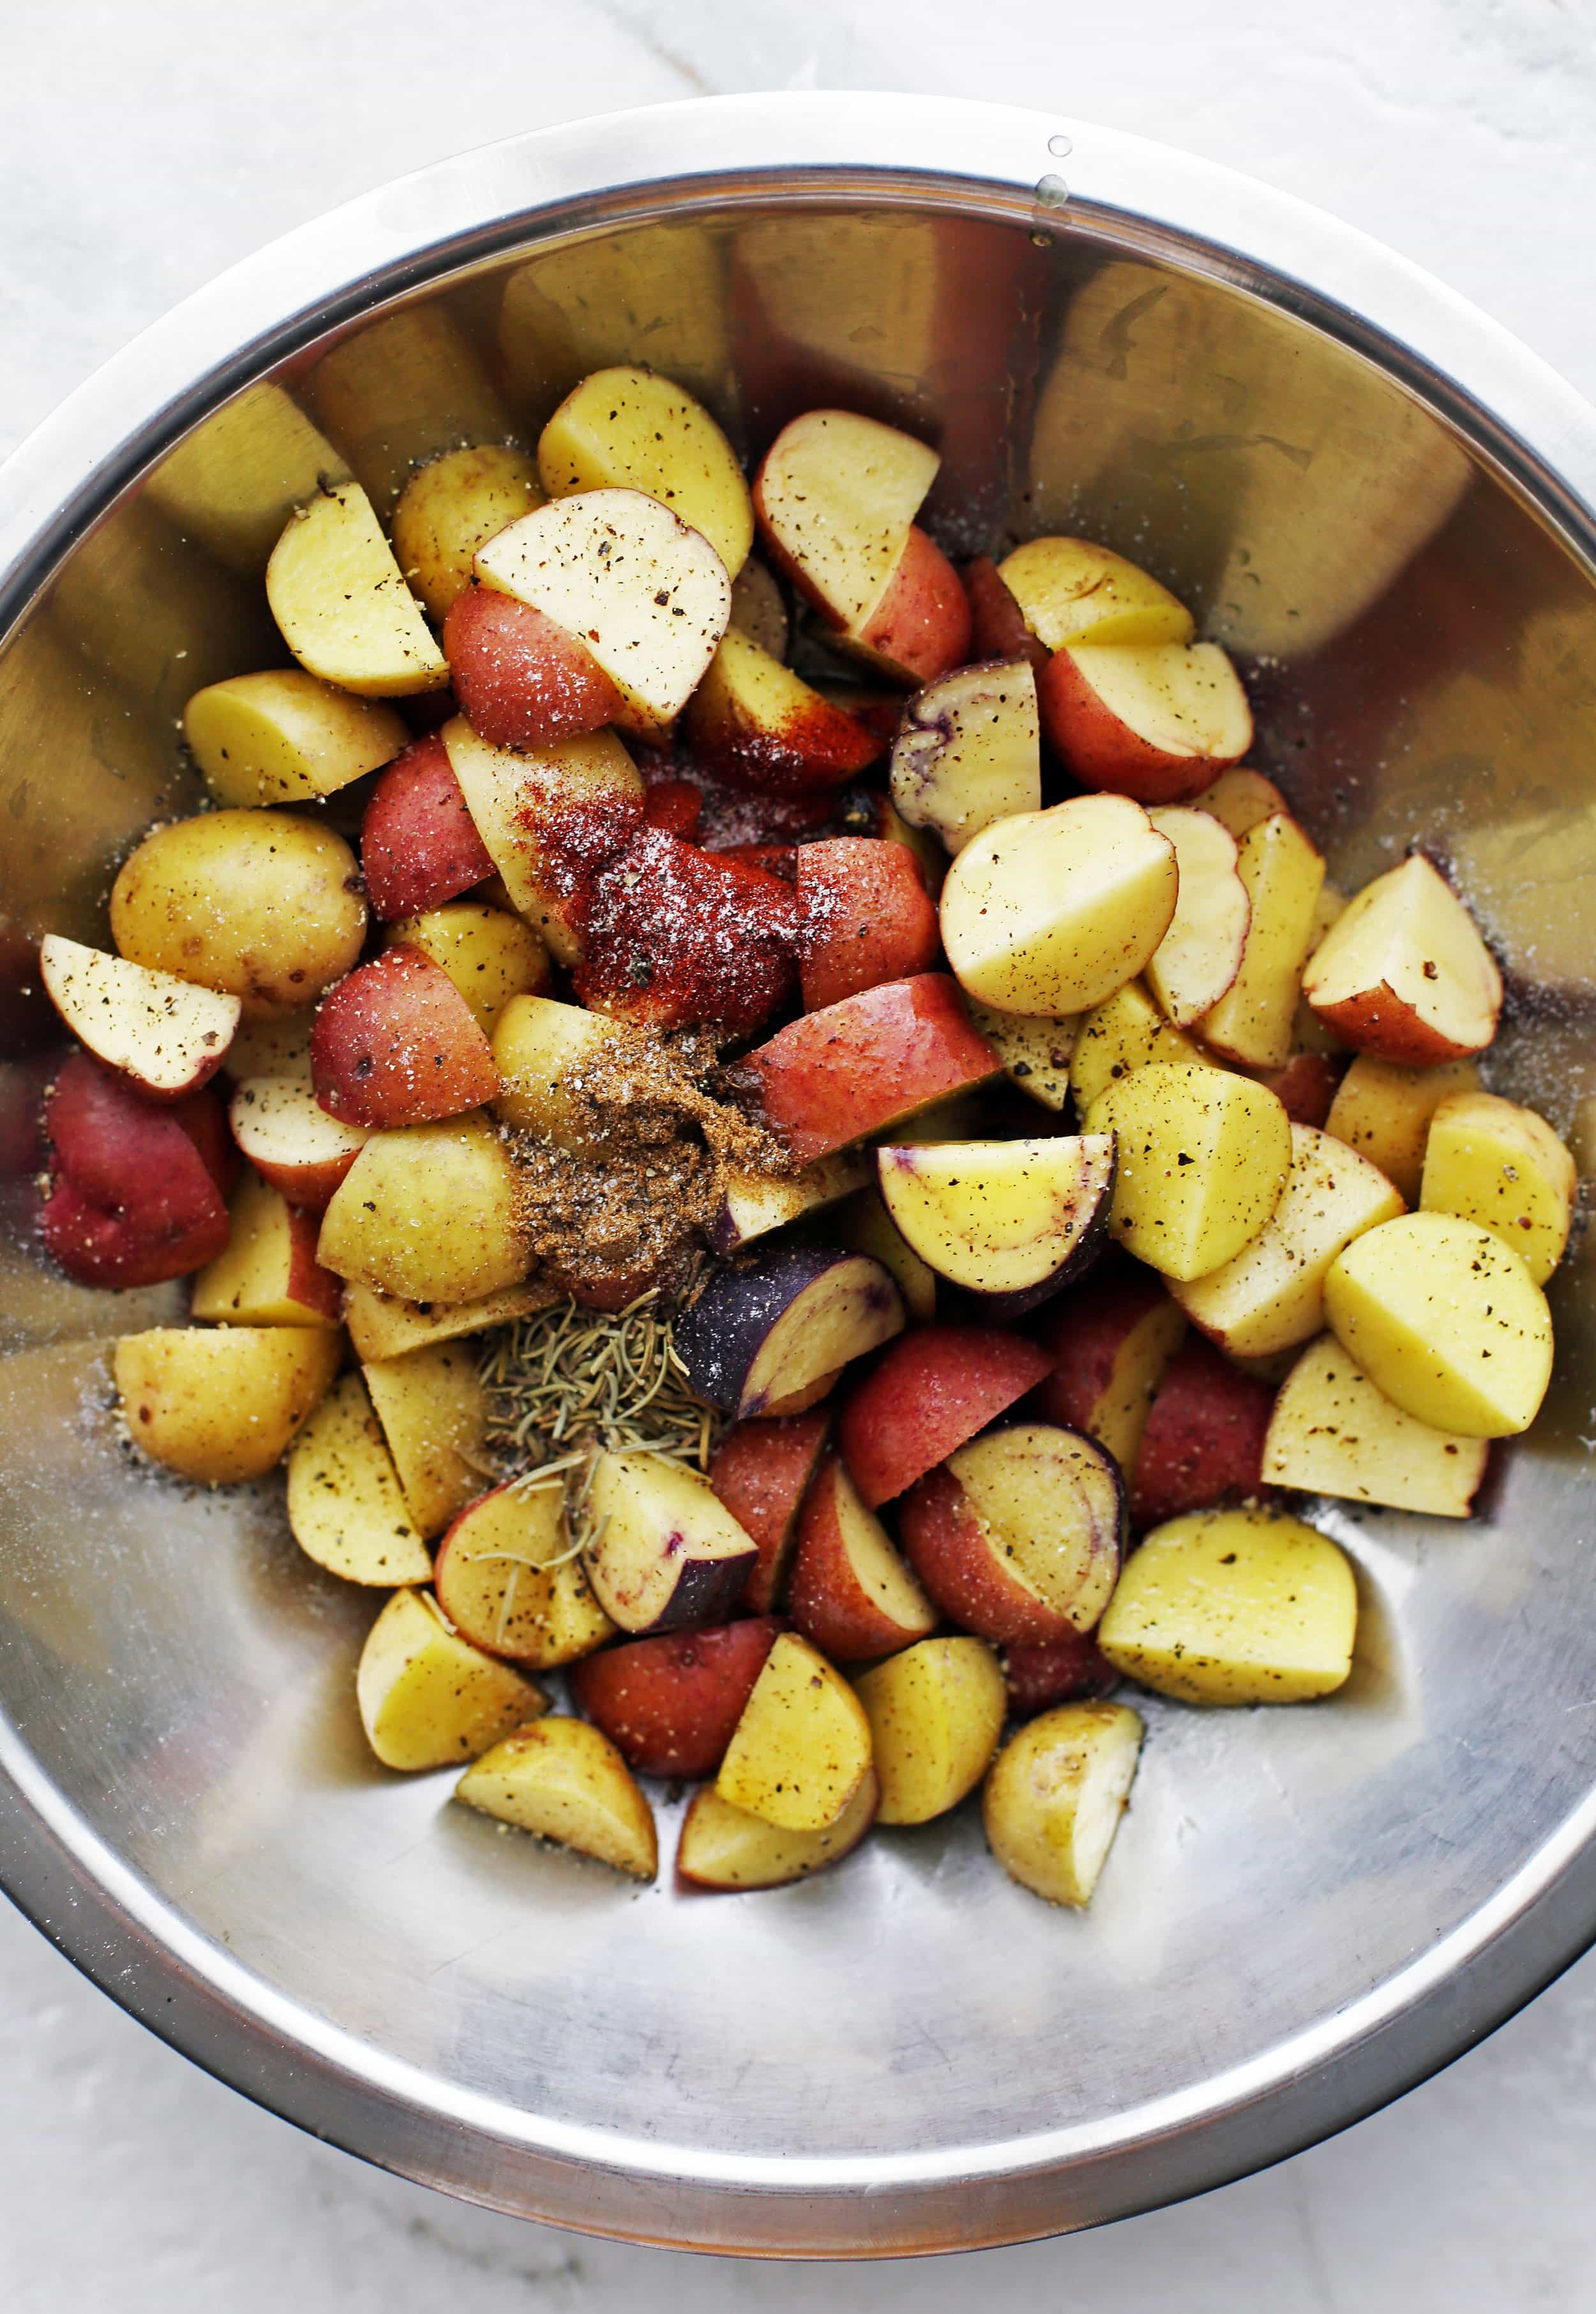 Quartered baby potatoes, olive oil, spices, and dried rosemary in a metal bowl.